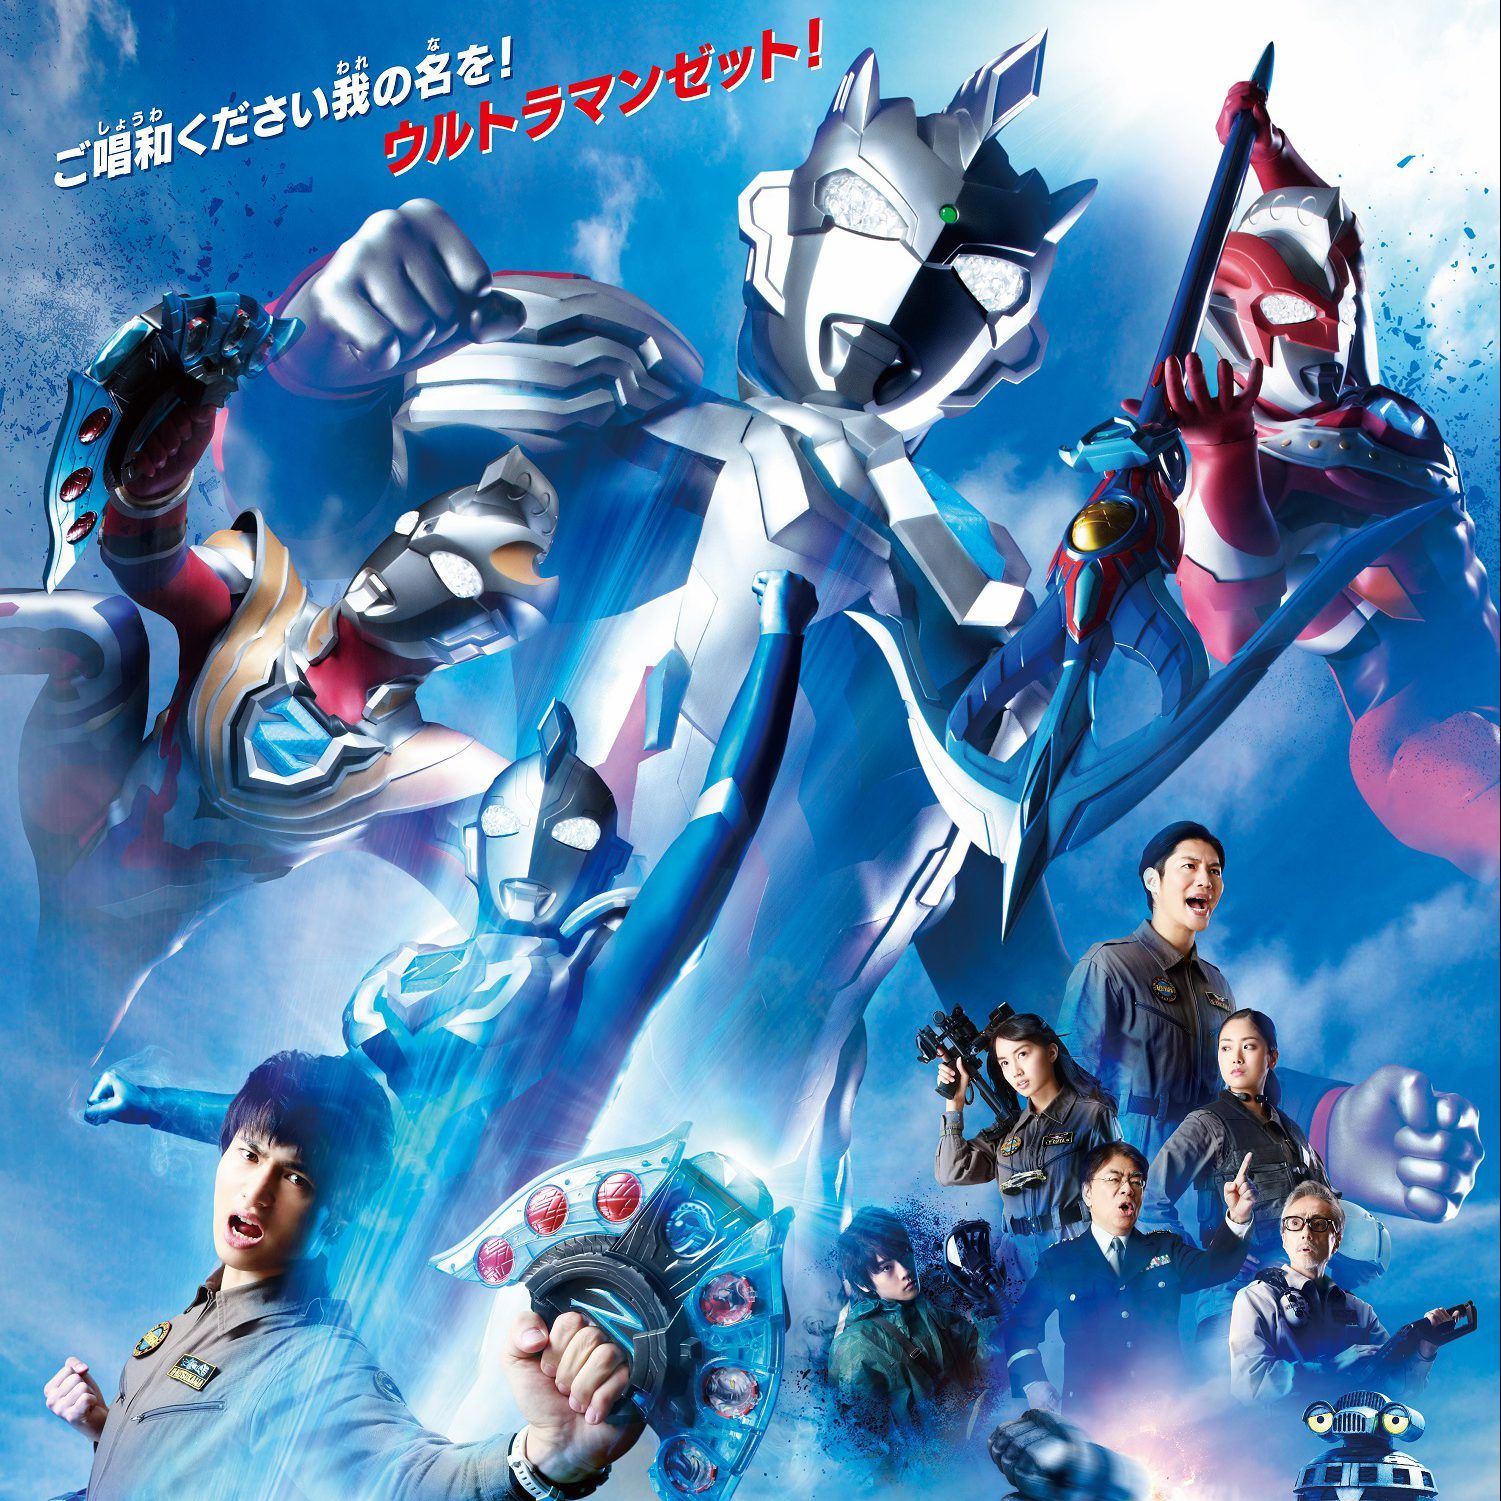 ULTRAMAN Z Available on ULTRAMAN OFFICIAL YouTube Channel